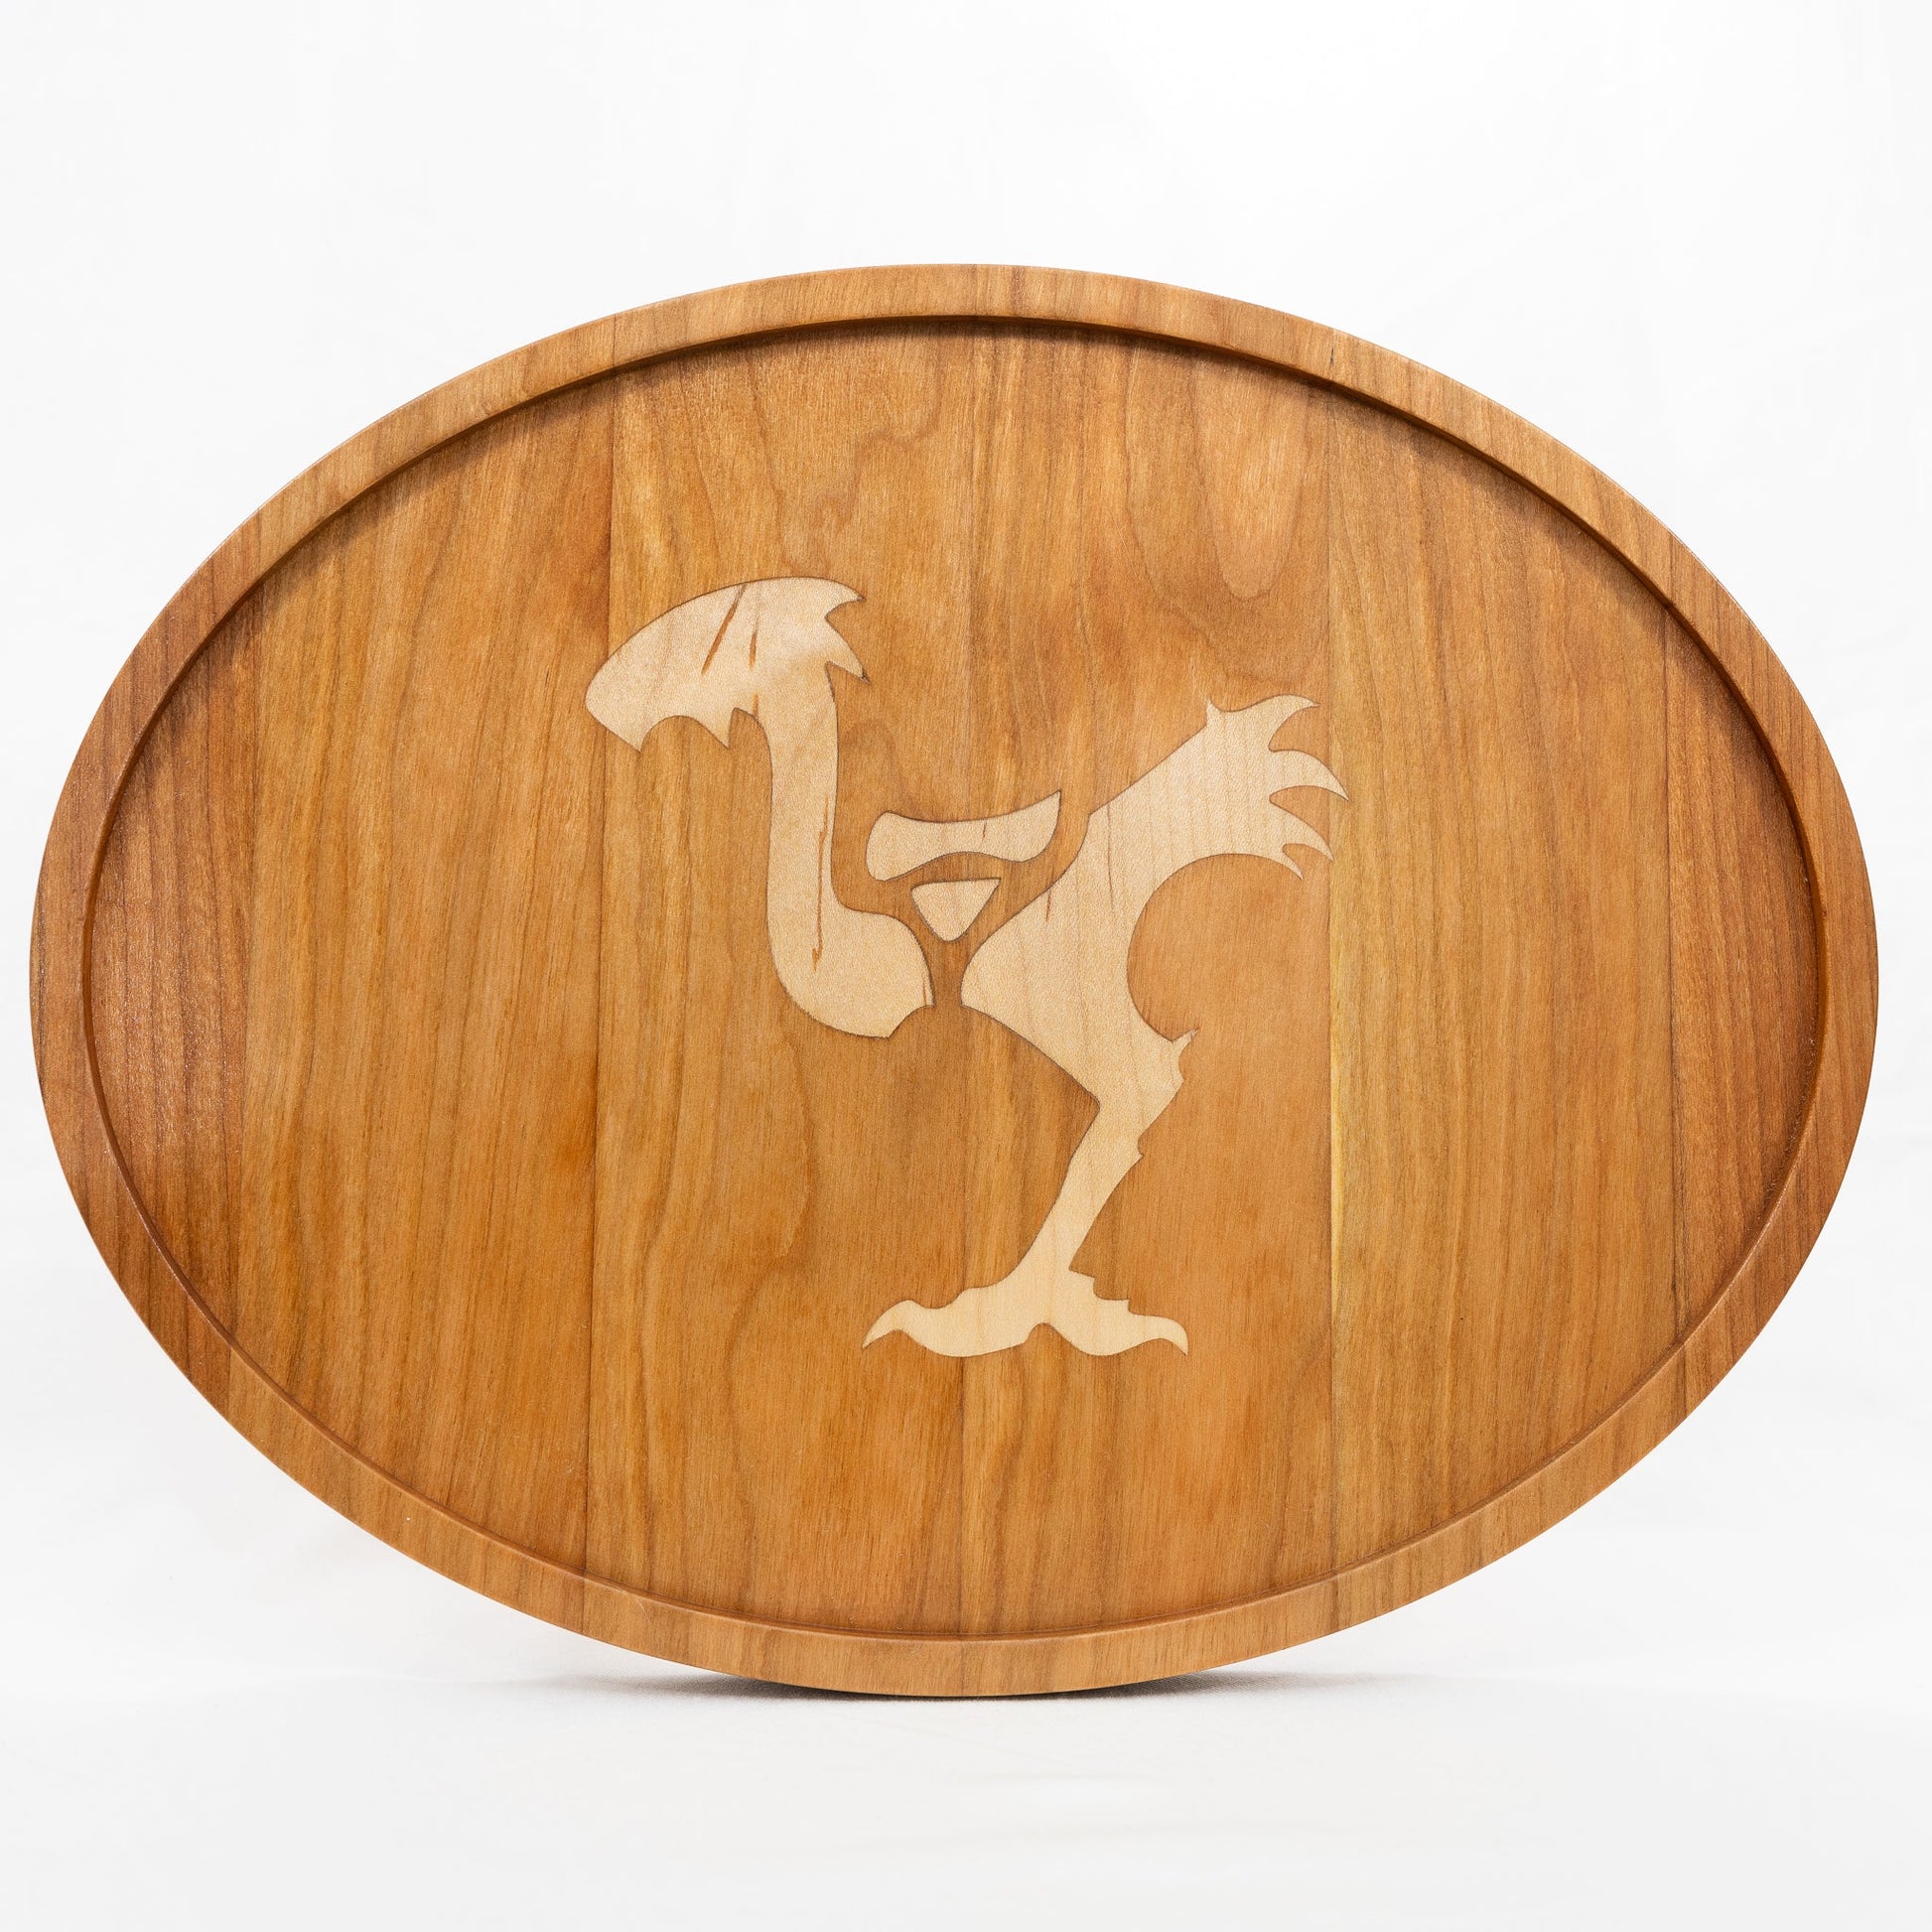 Handmade solid Cherry and inlaid Maple wood platter serving tray with a Final Fantasy Chocobo